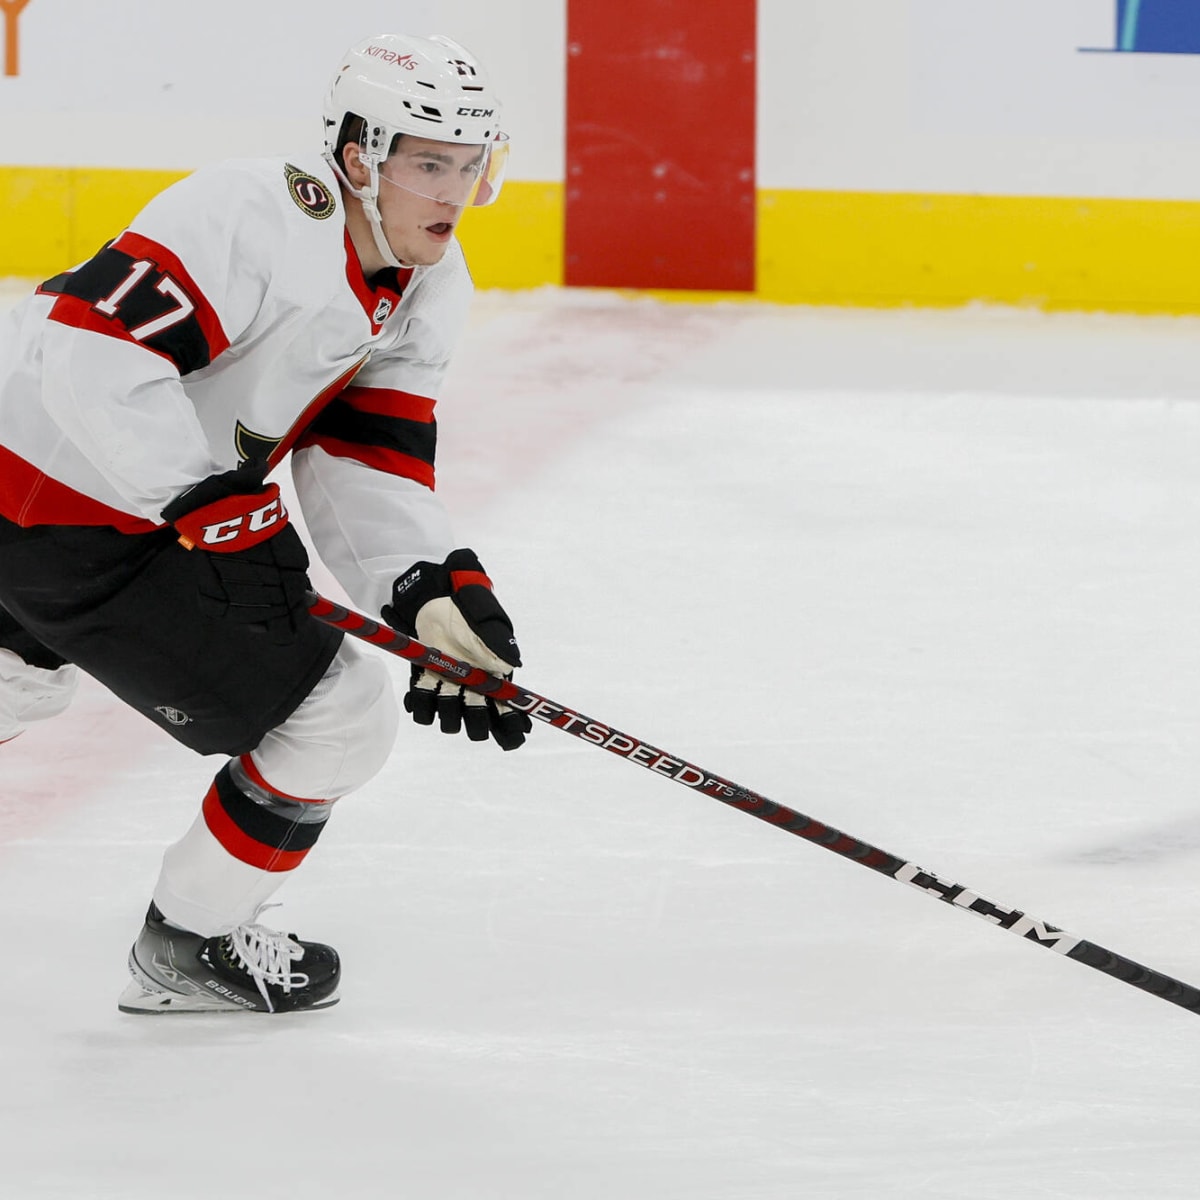 Brady Tkachuk is one of a kind as an NHL captain and personality